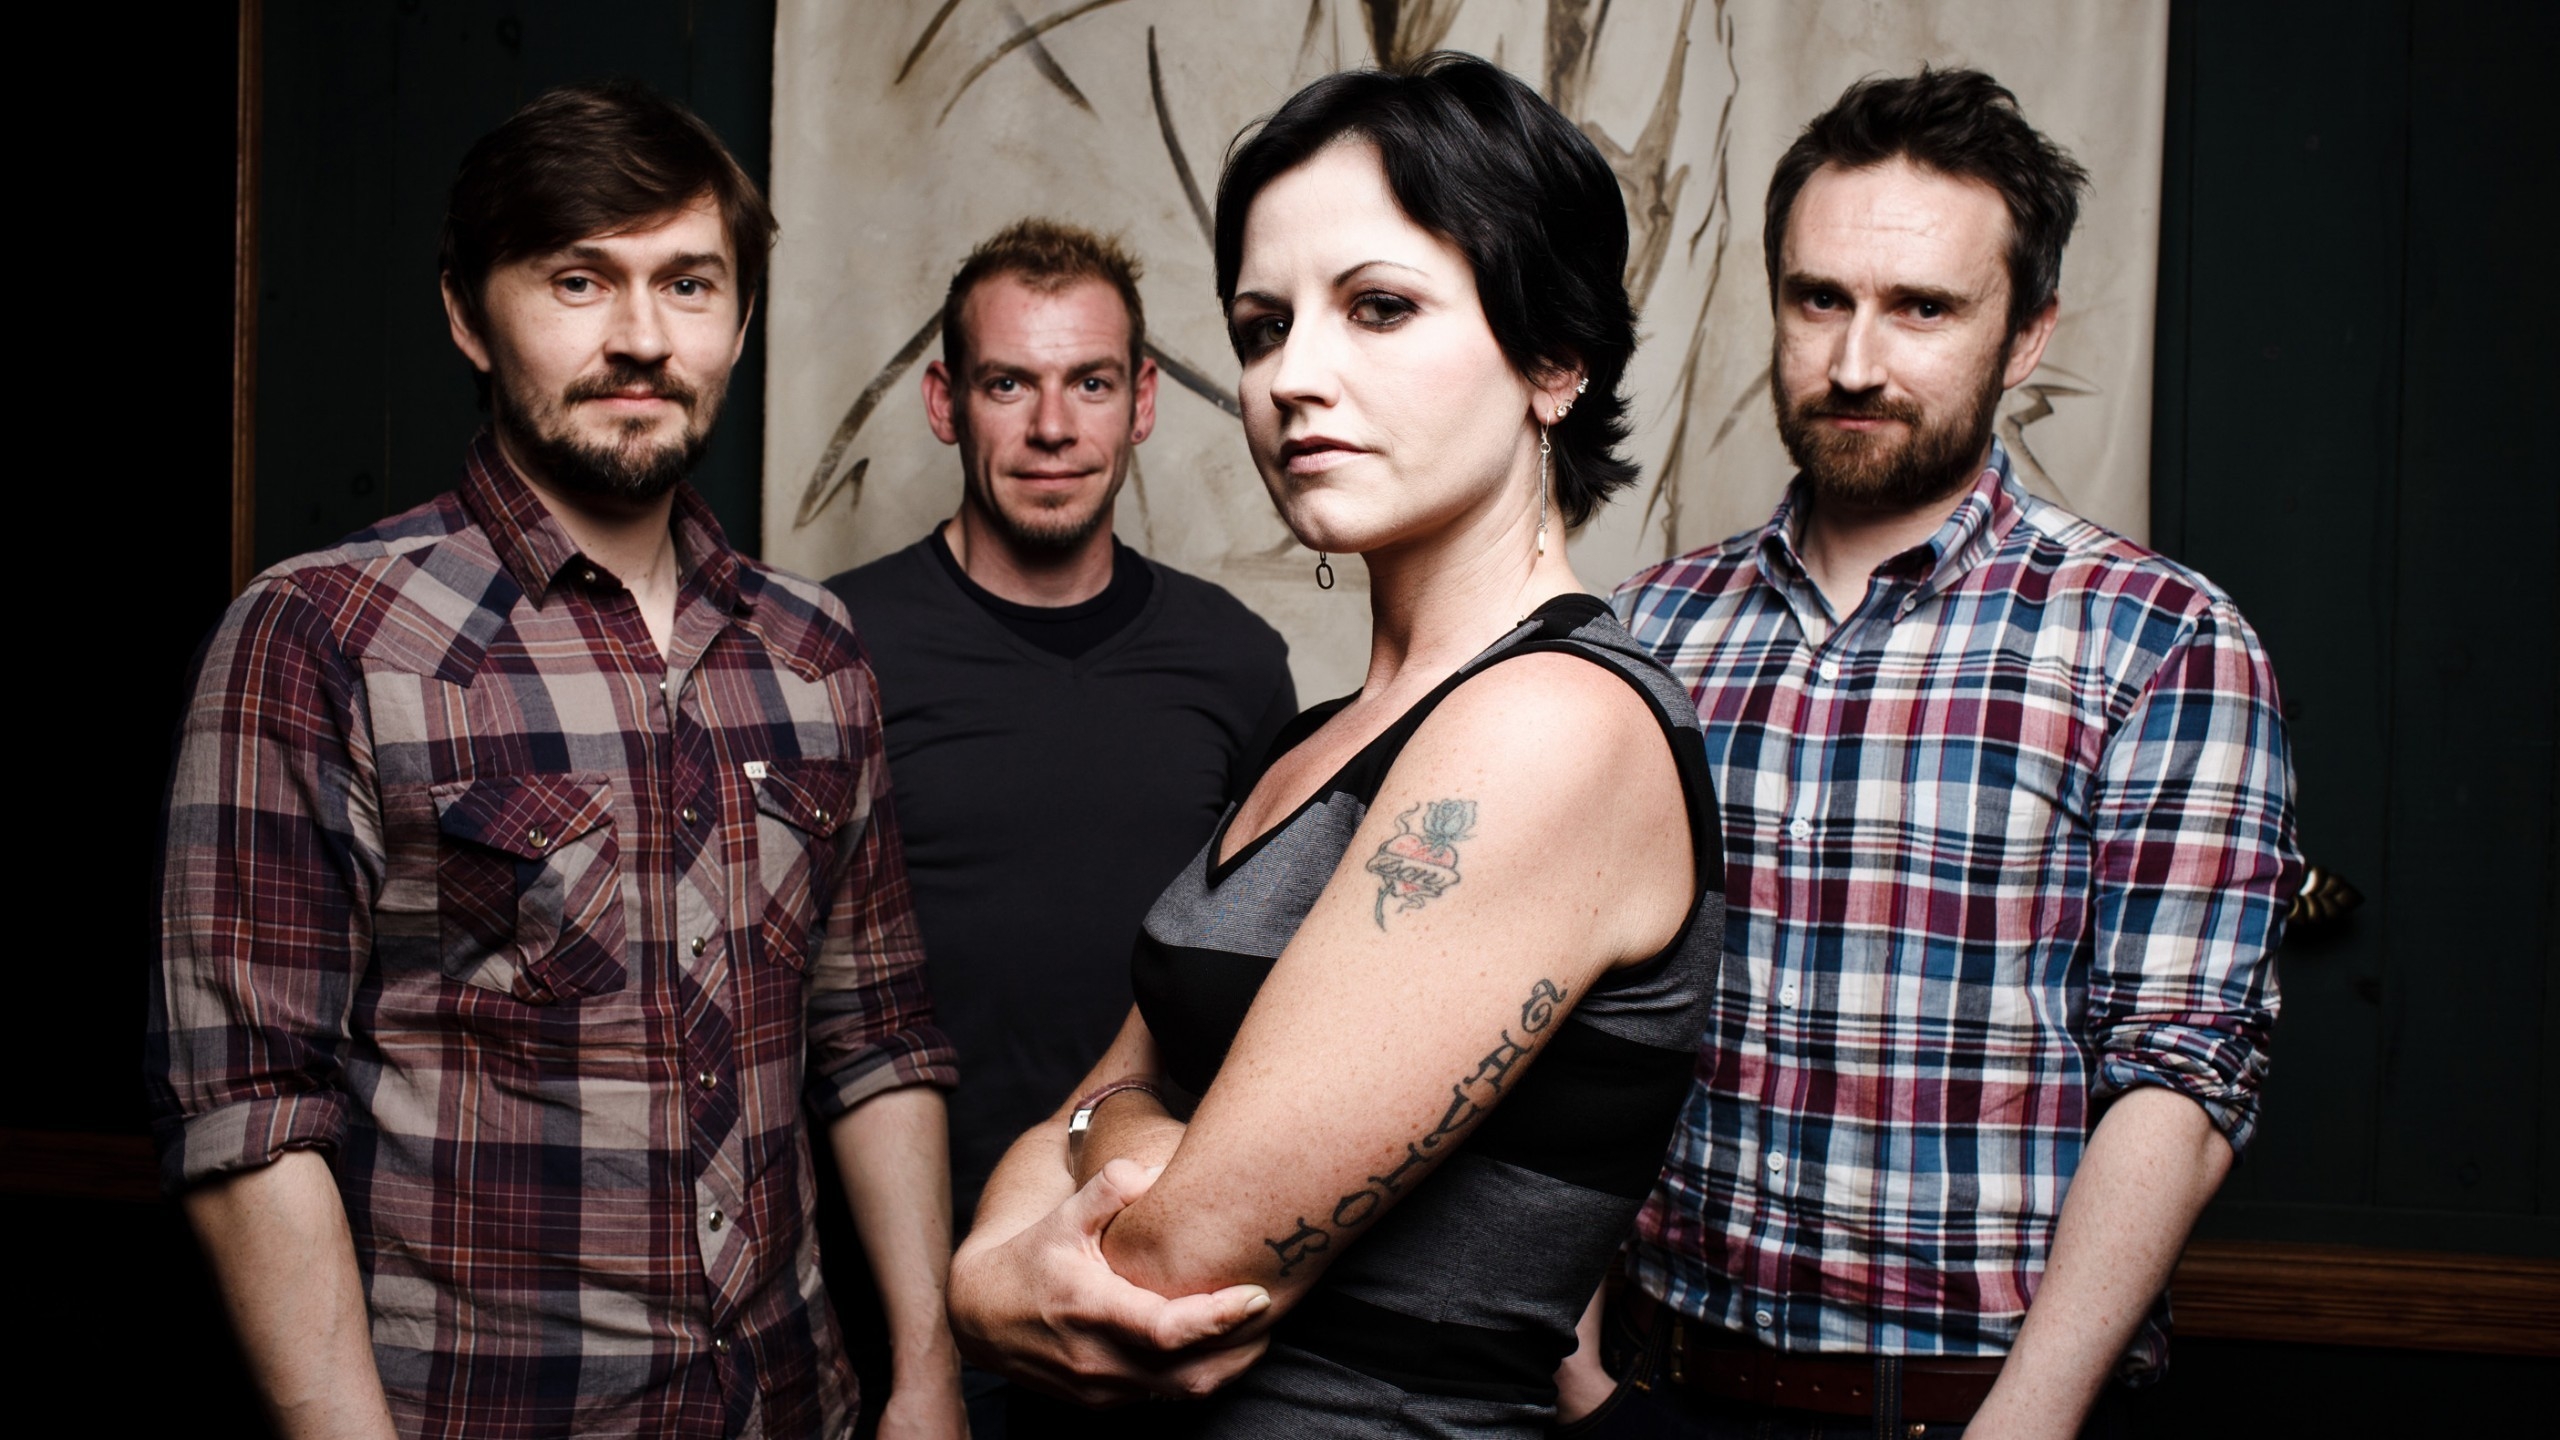 The Cranberries for 2560x1440 HDTV resolution